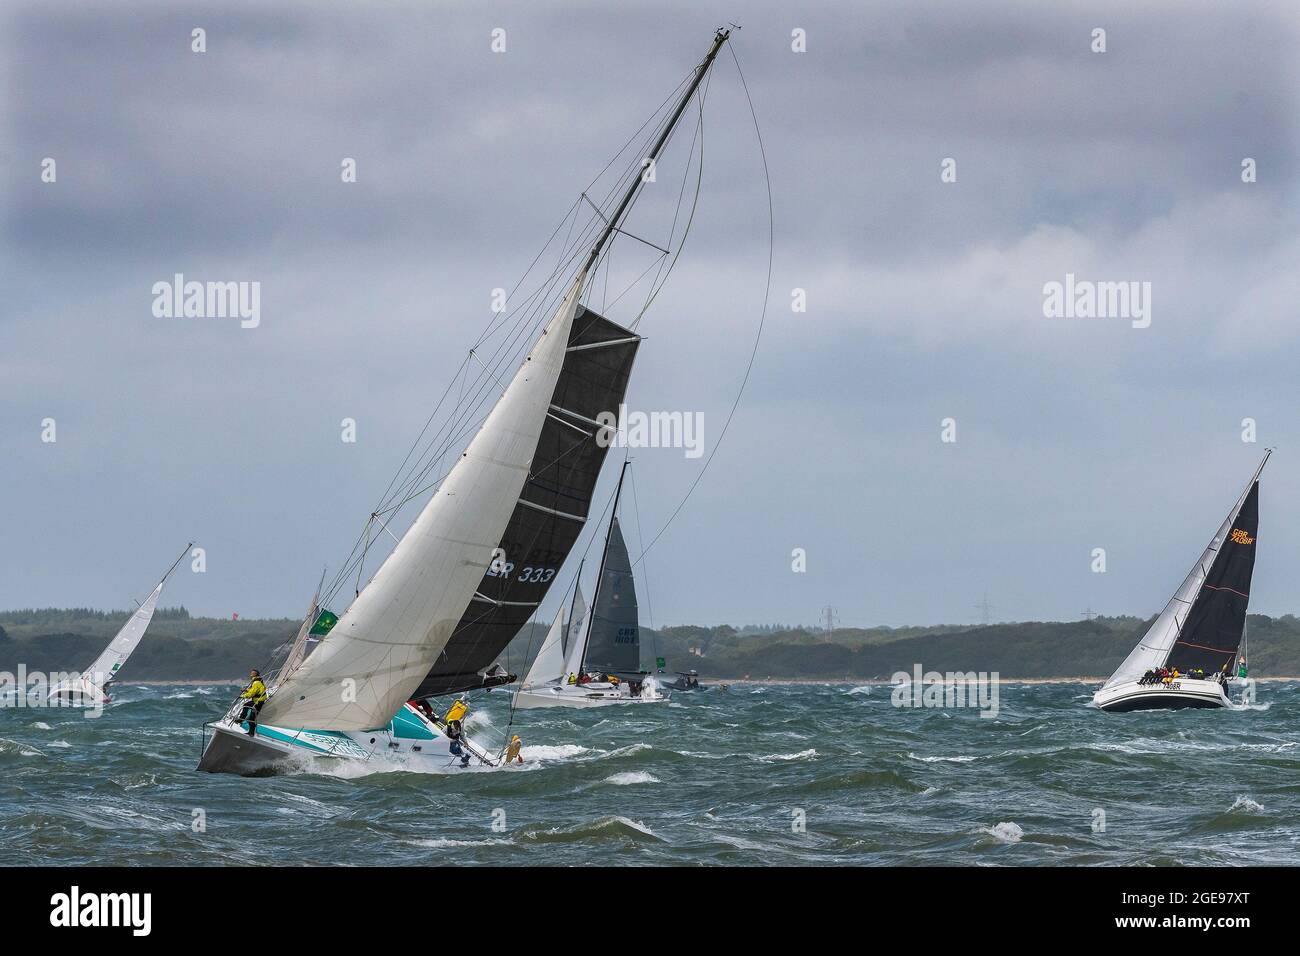 Start of the 2021 Rolex Fastnet Race on 8 August 2021.The competitors faced gruelling conditions with high winds.  Cowes, Isle of Wight, England, UK Stock Photo